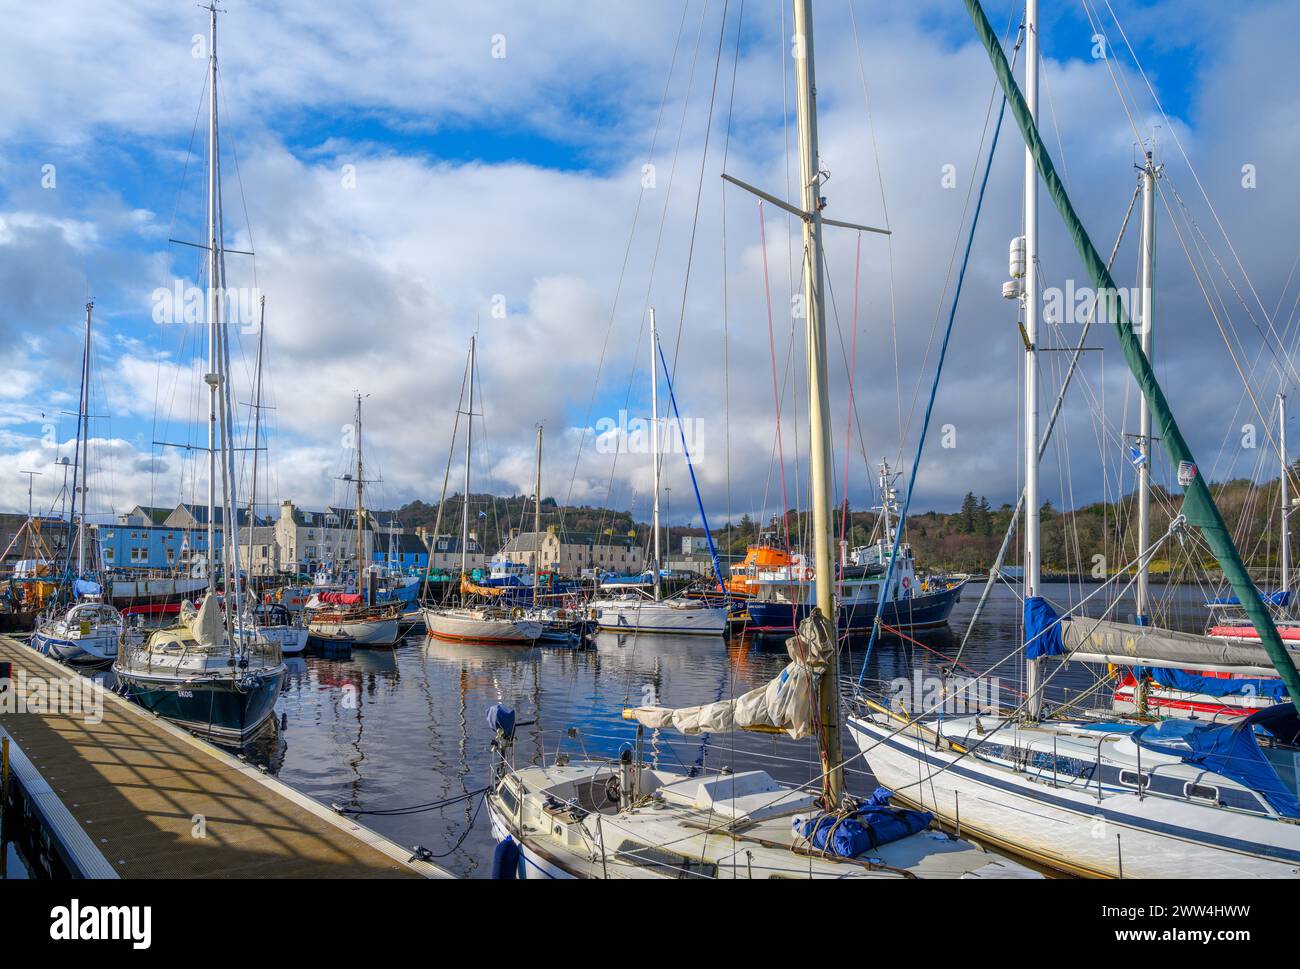 Boats in the harbour in Stornaway, Isle of Lewis, Outer Hebrides, Scotland, UK Stock Photo